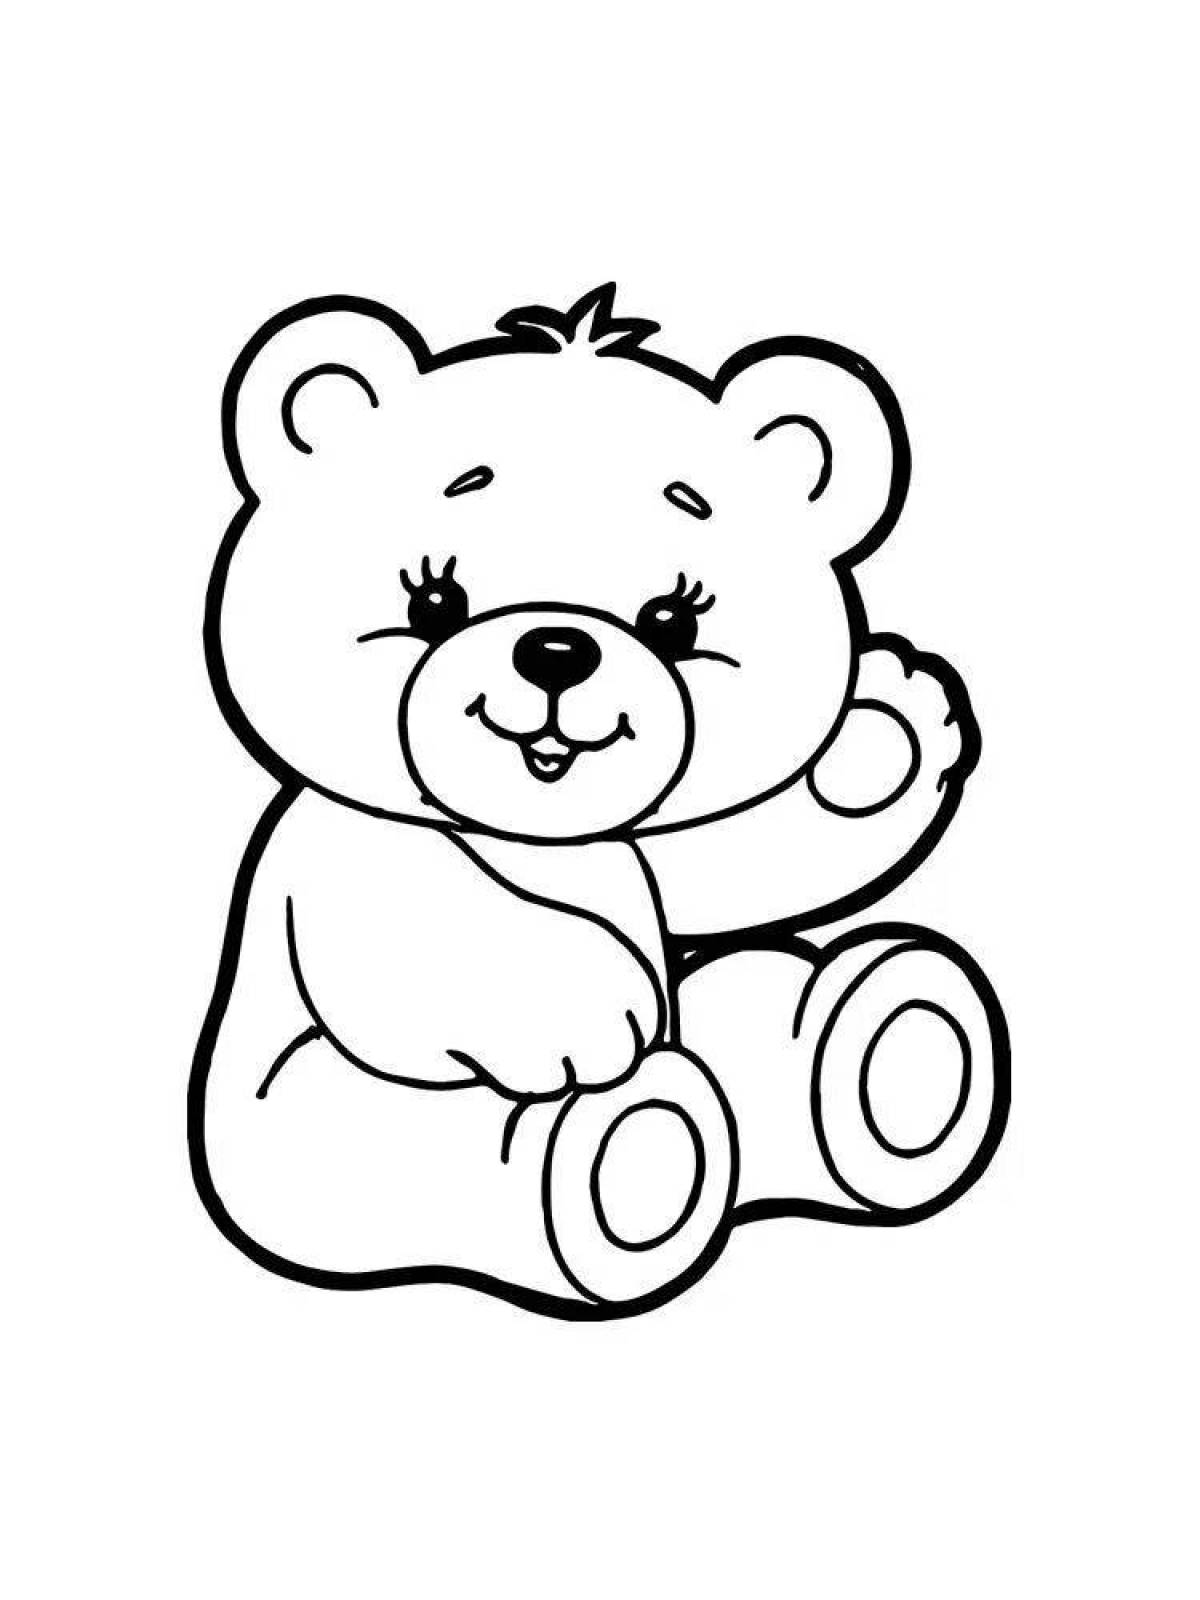 Surprised teddy bear coloring page for kids